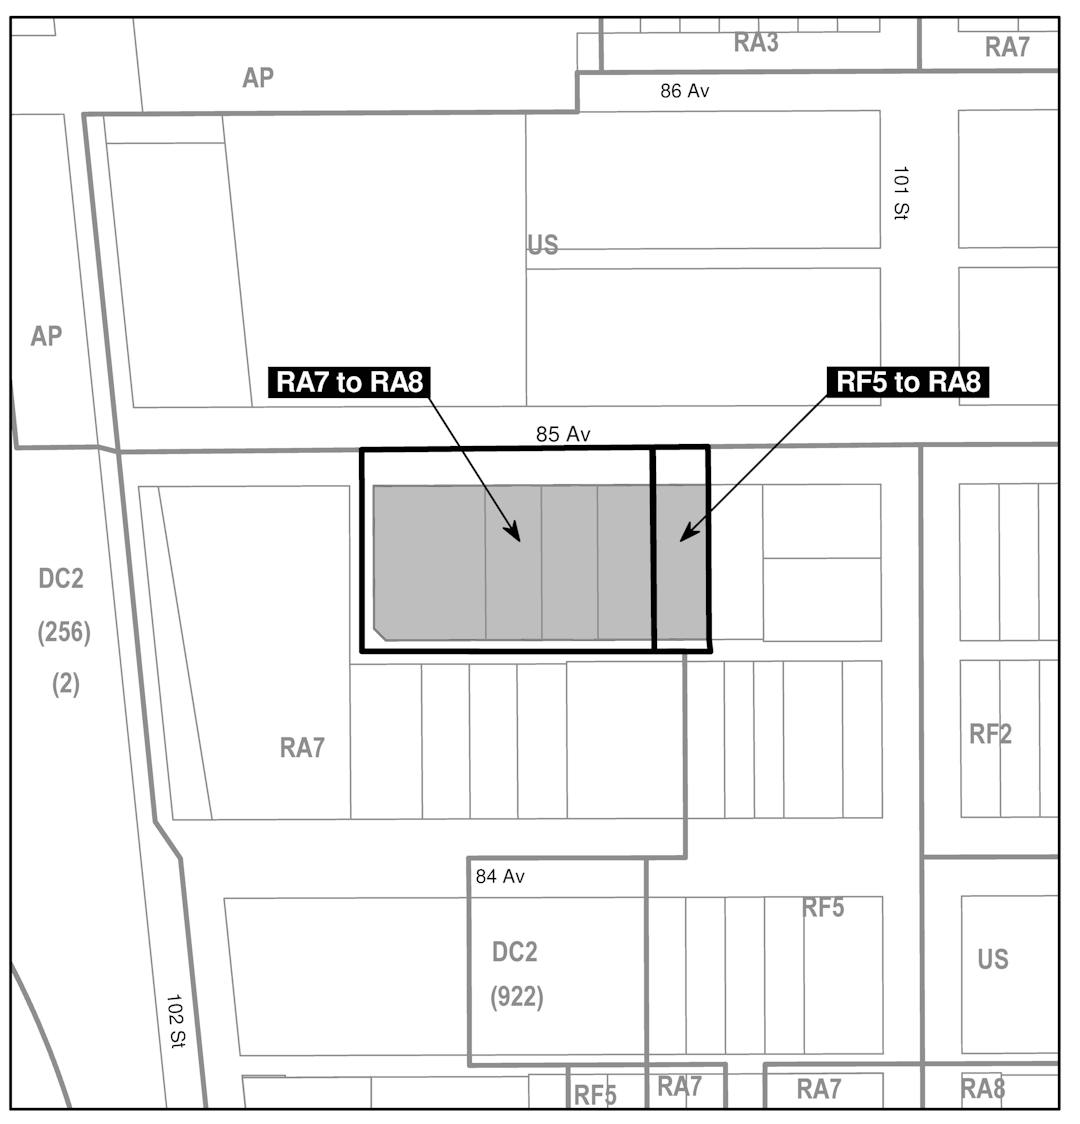 a black and white map of the area around the property that is proposed to be rezoned (10119, 10125, and 10135 - 85 Avenue NW), with a grey box on the property, labelled "RA7 to RA8 and RF5 to RA8".